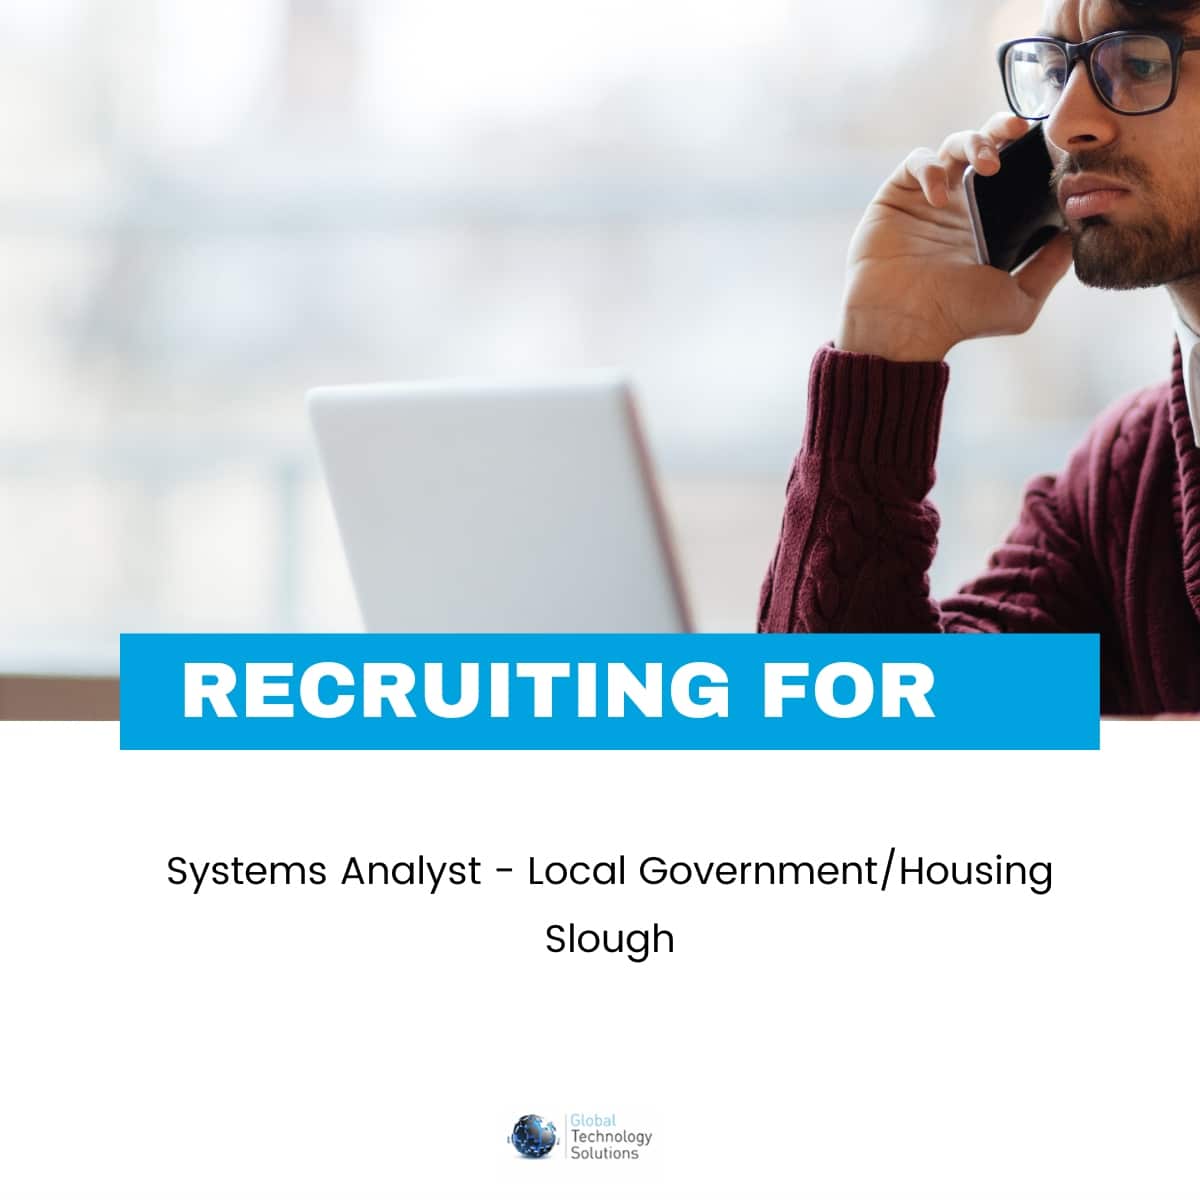 Systems Analyst in Slough